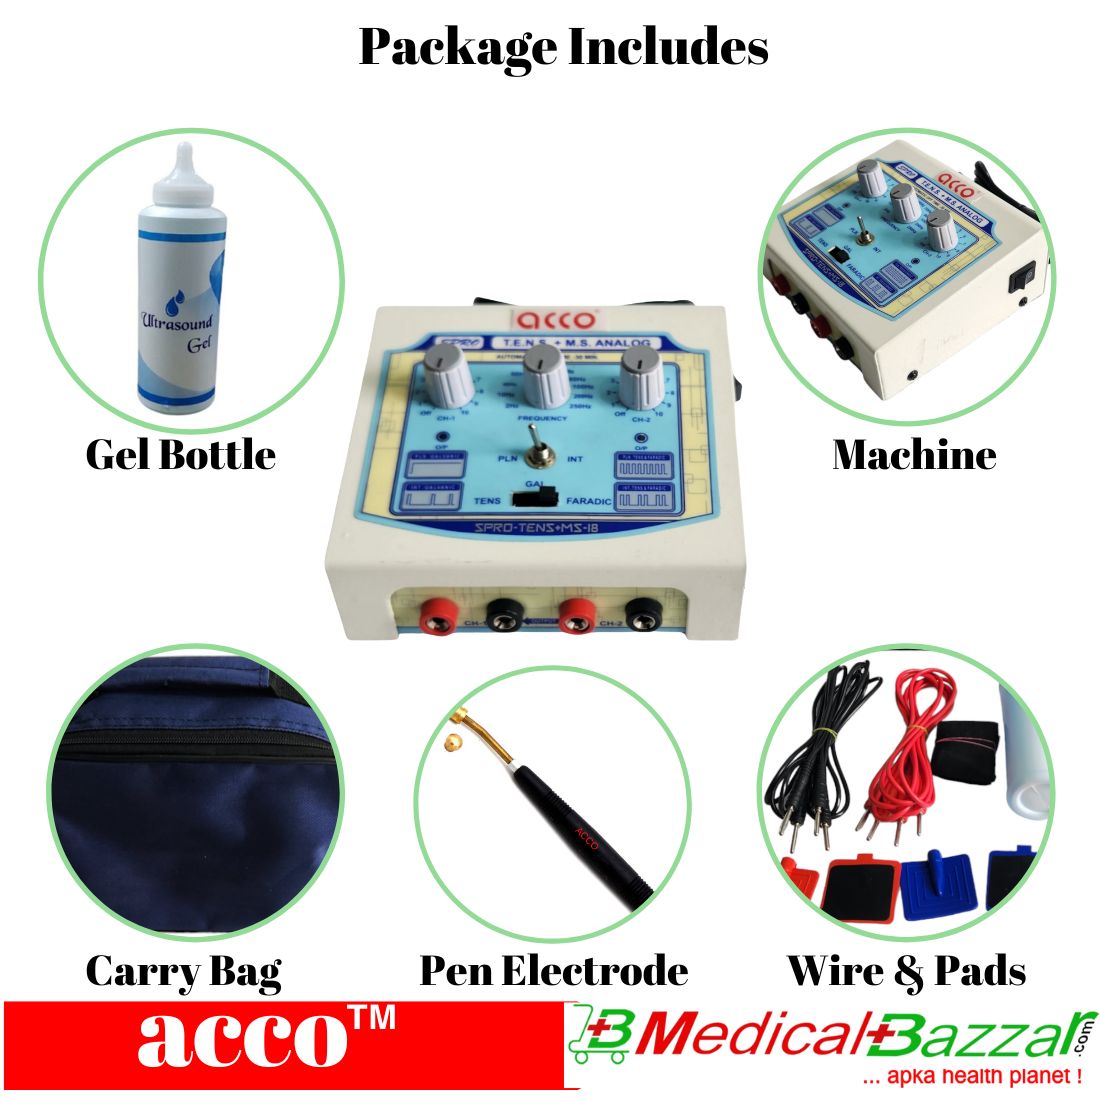 ACCO Muscle Stimulator Machine for Physiotherapy